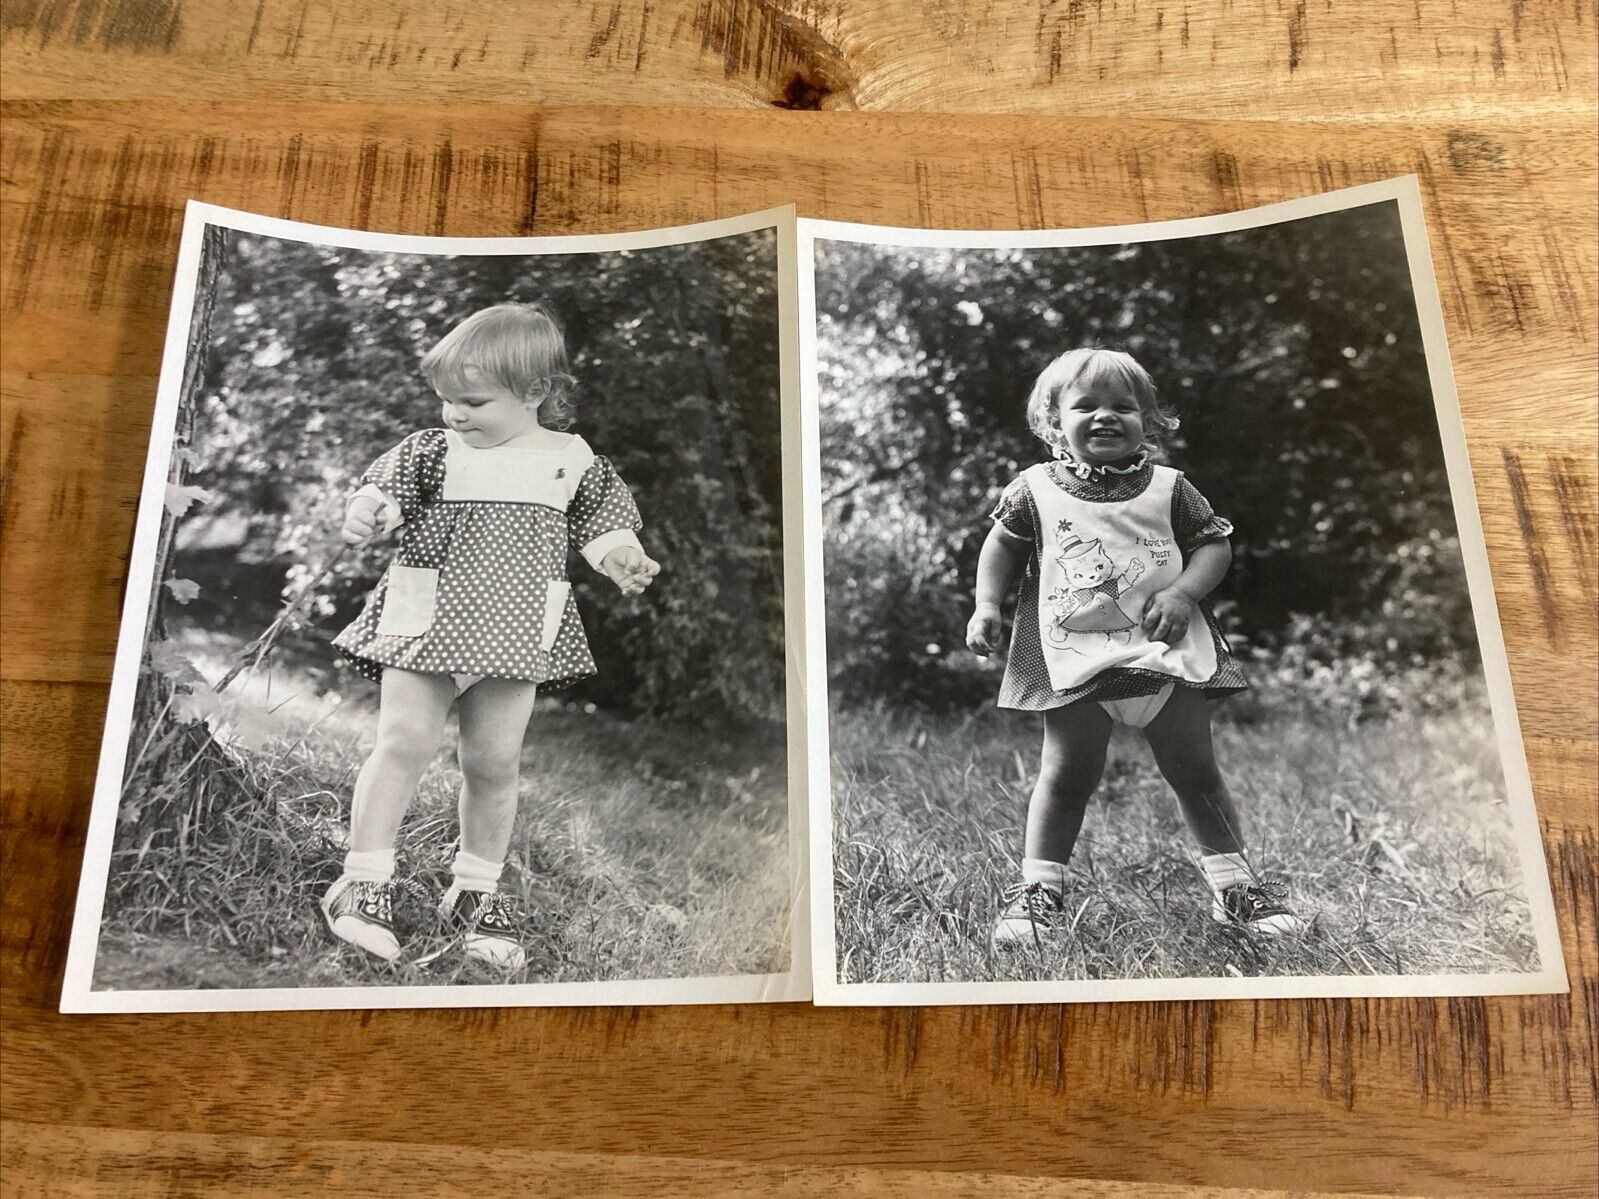 Darling Toddler In Field 2 Vintage Photographs Pictures Photo Black White 8 x 10